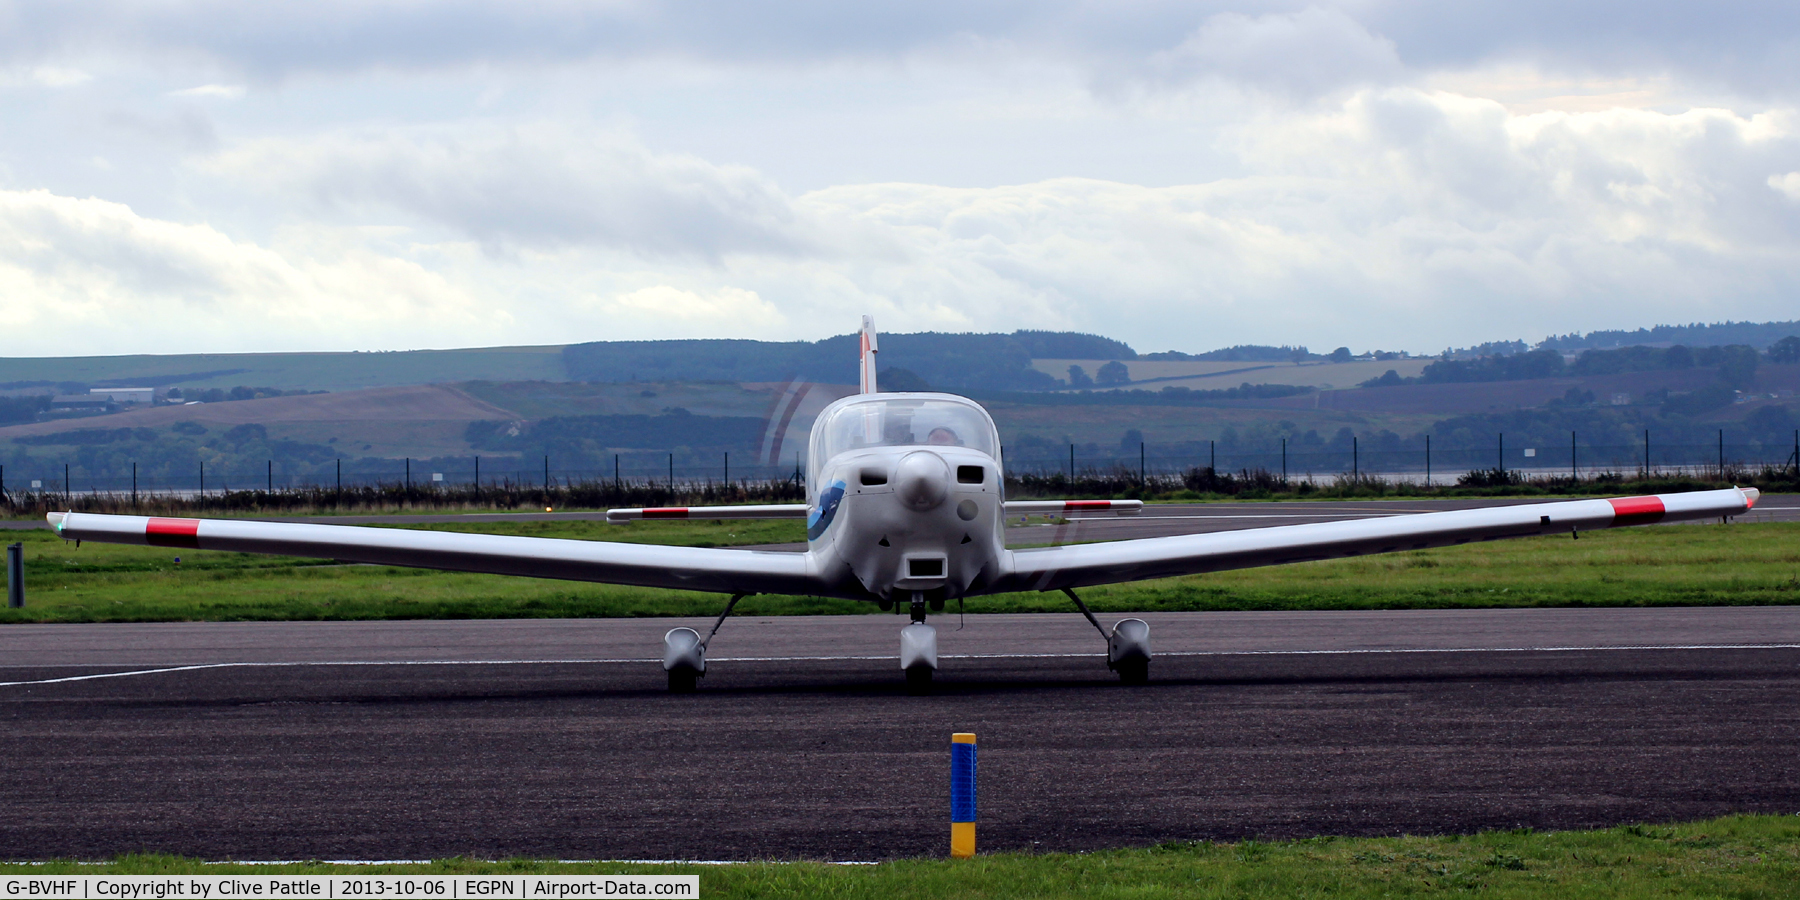 G-BVHF, 1994 Grob G-115D-2 C/N 82011, Front view at Dundee Riverside EGPN became G-ROBA in March 2016